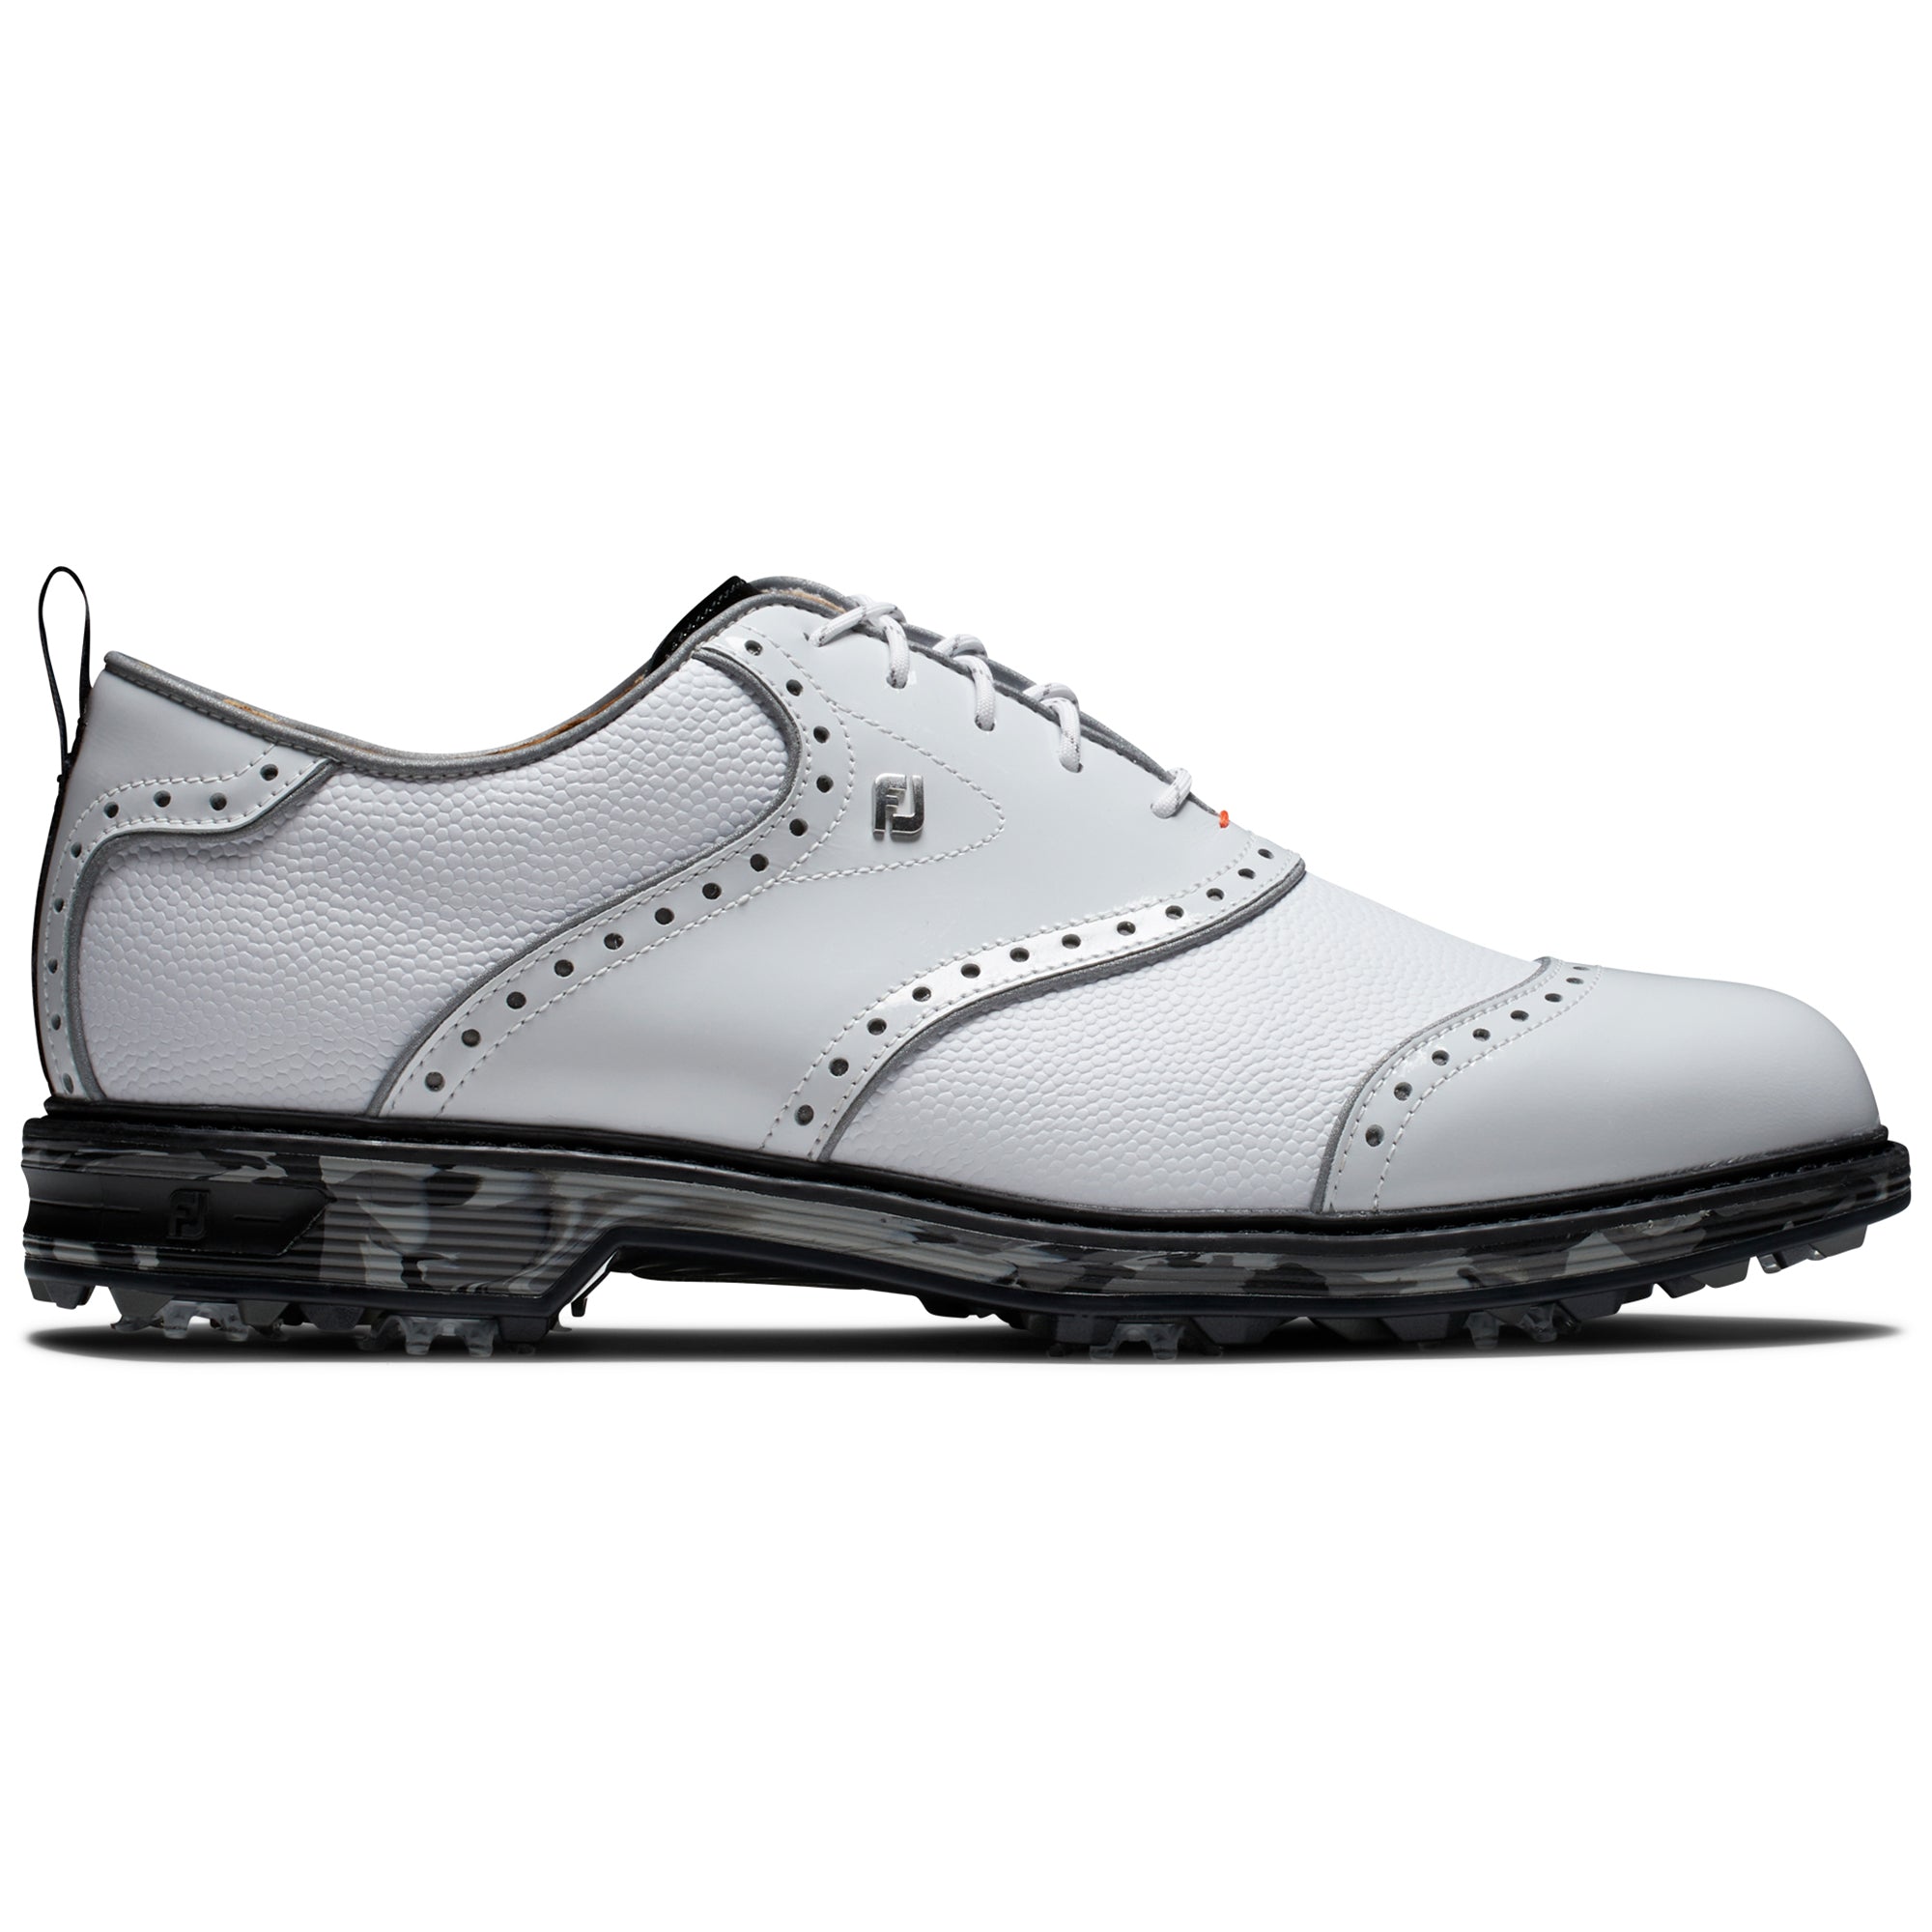 FootJoy x Todd Snyder Premiere Series Wilcox LE Golf Shoes